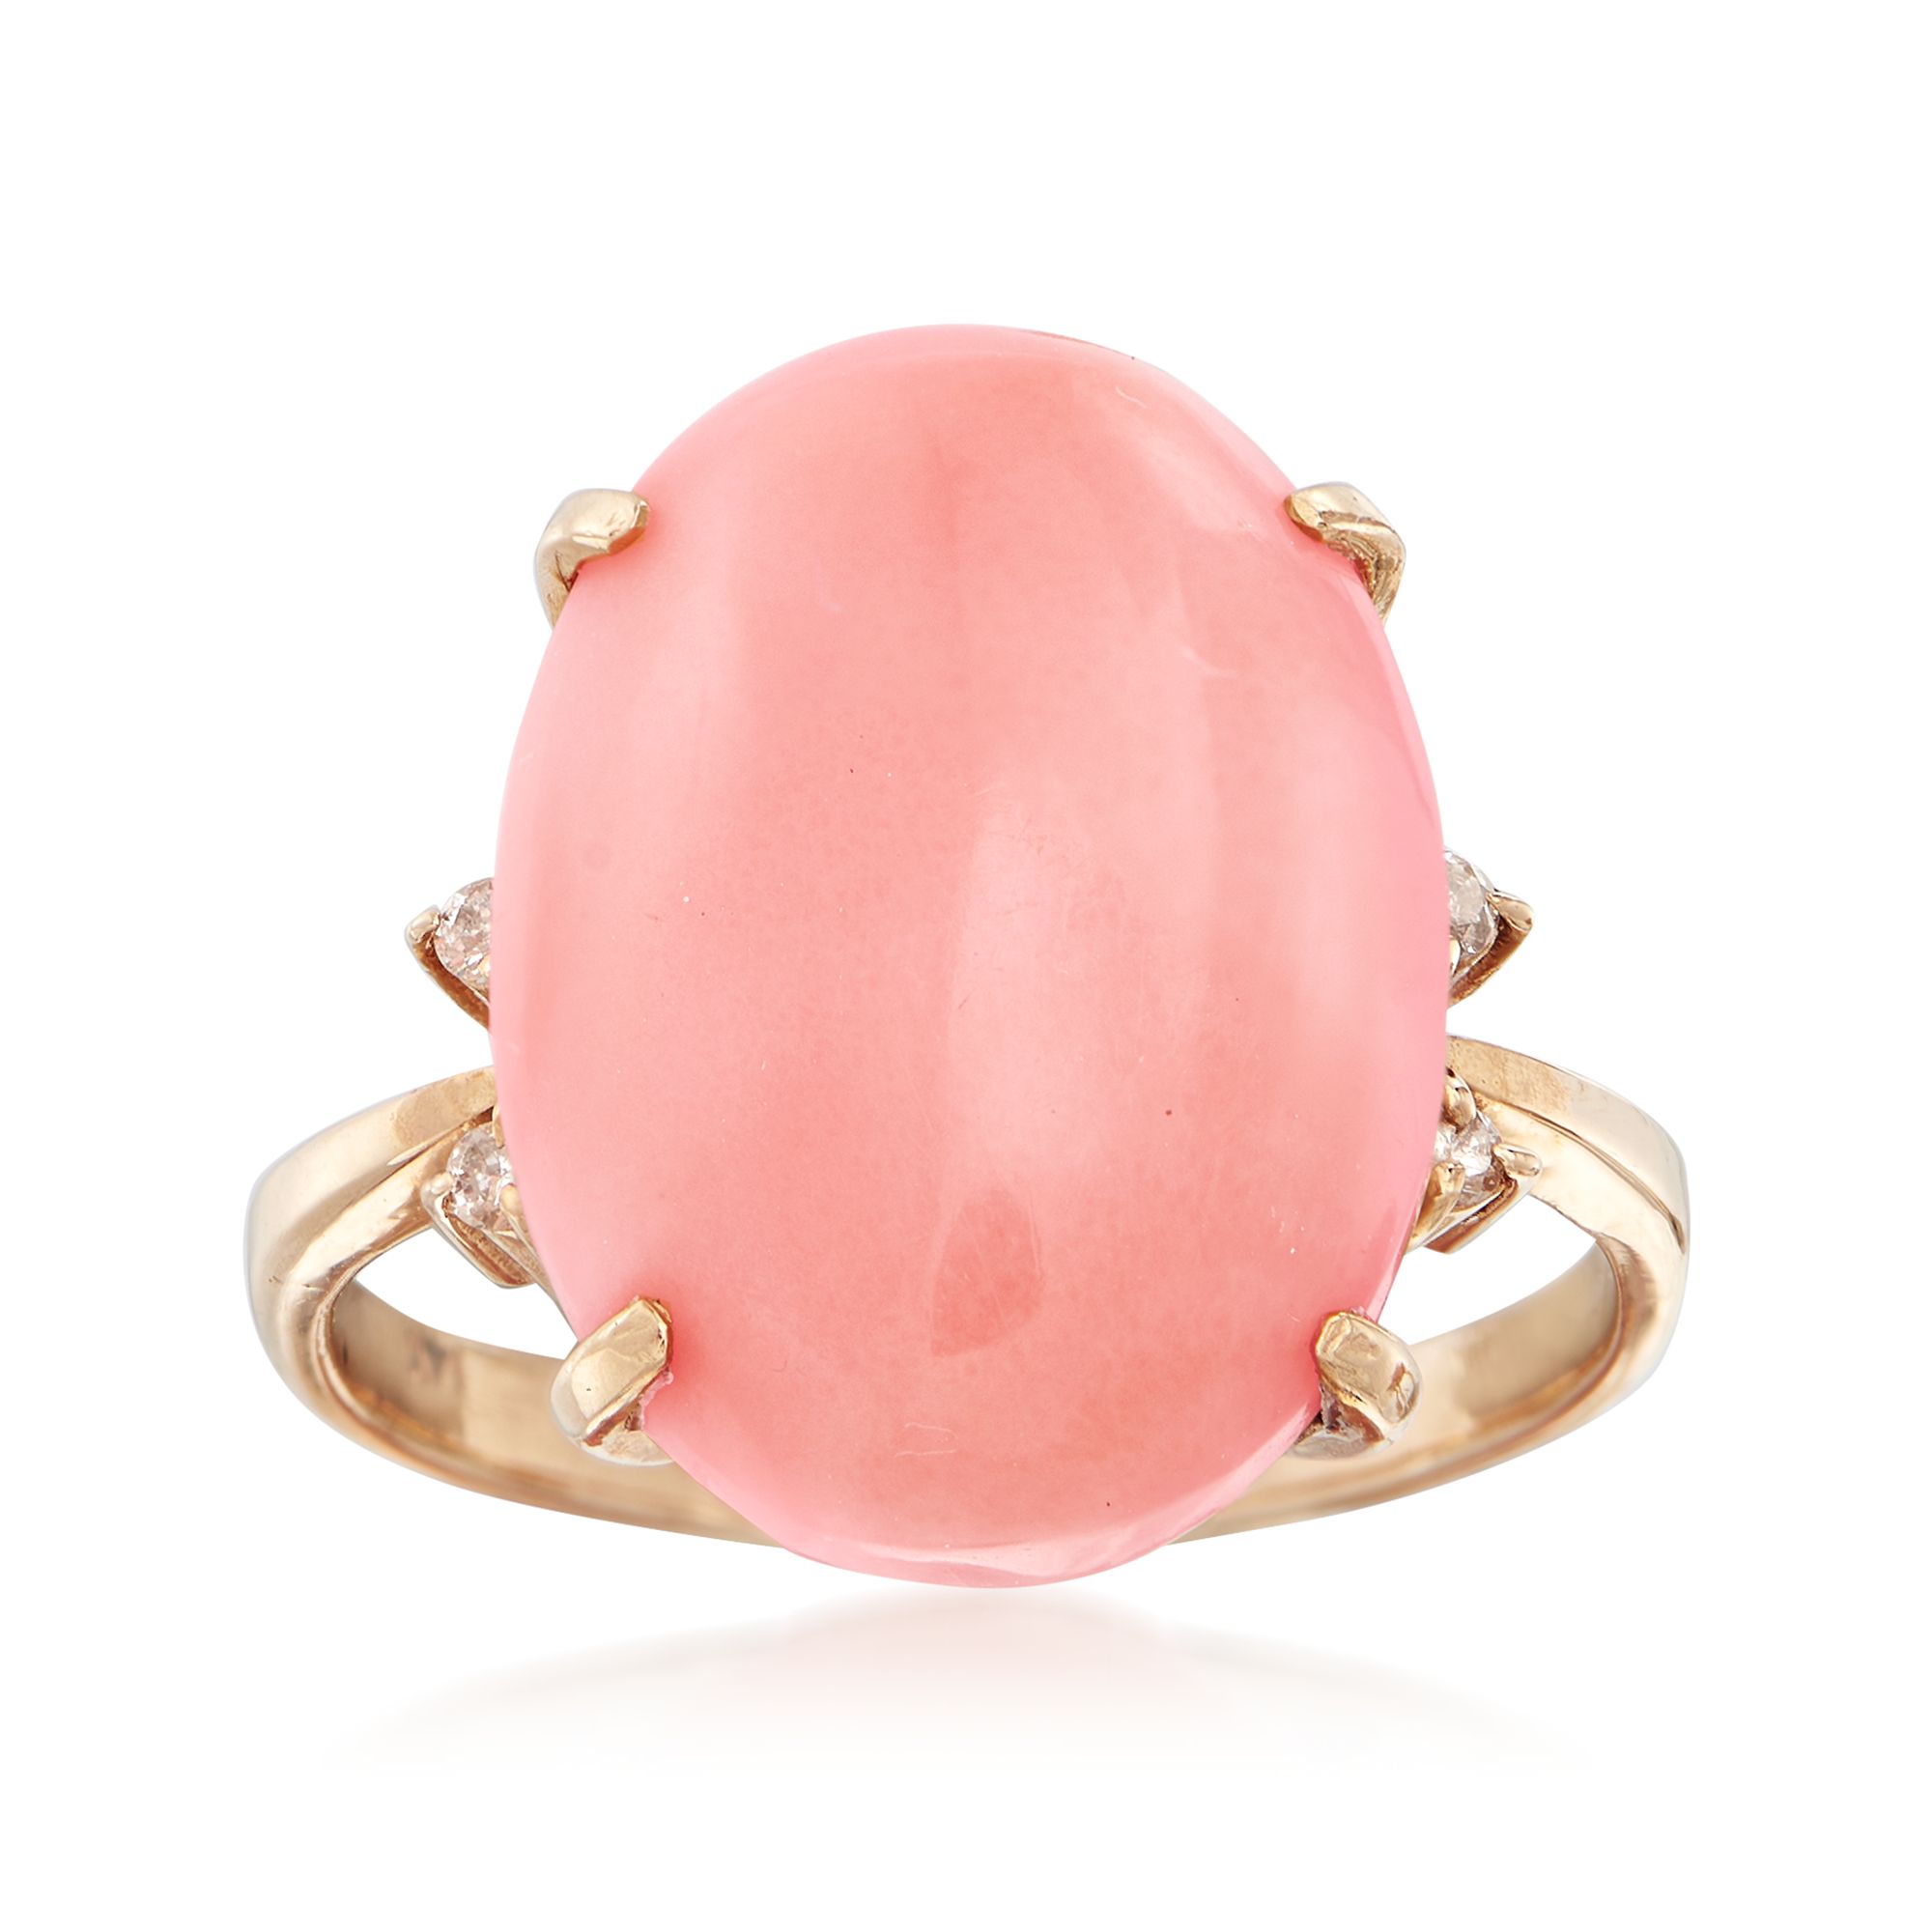 C. 1970 Vintage Pink Coral Ring With Diamond Accents in 14kt Yellow Gold |  Ross-Simons